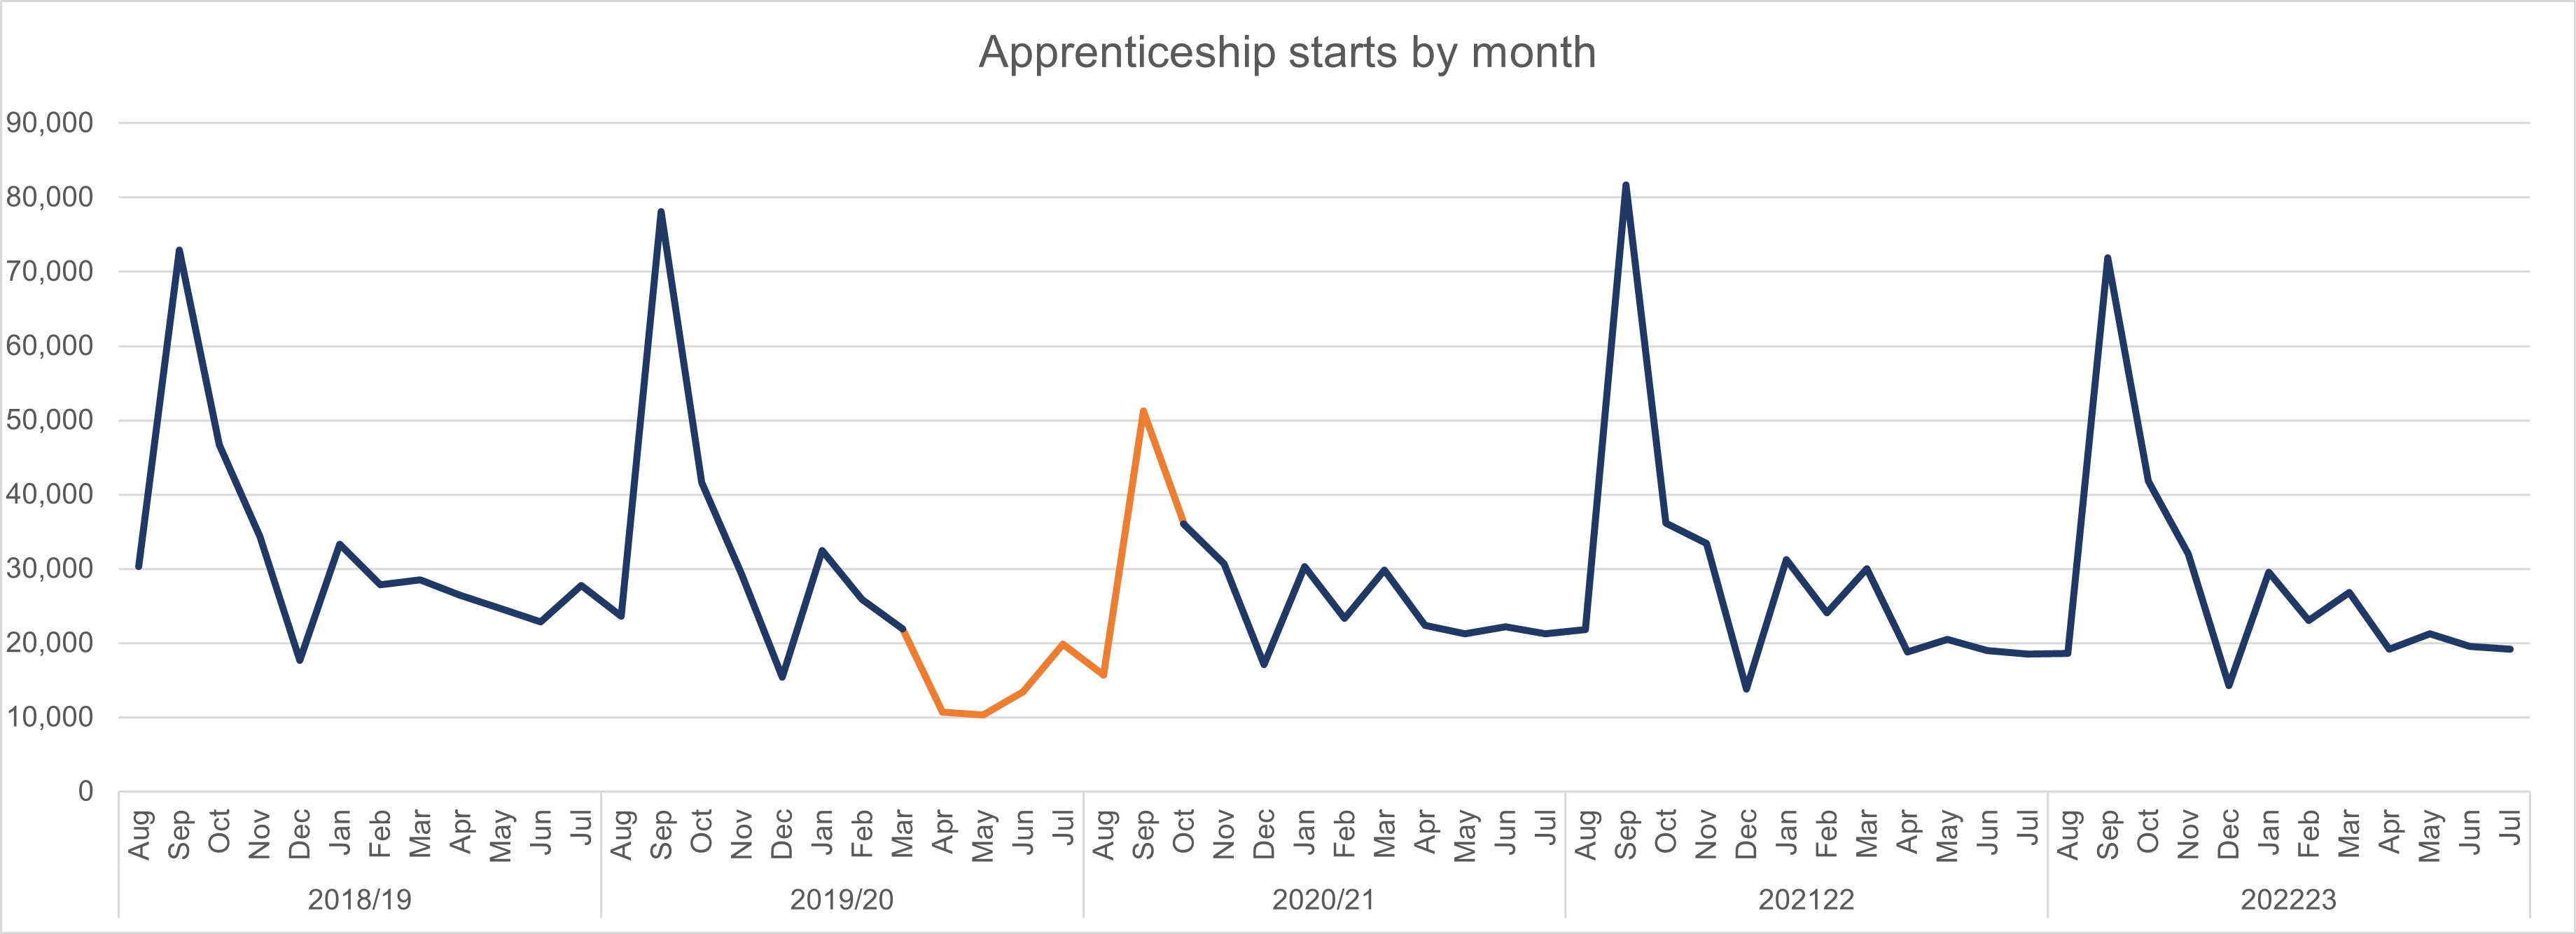 A line chart showing apprenticeship starts by month, 2019 to 2023.